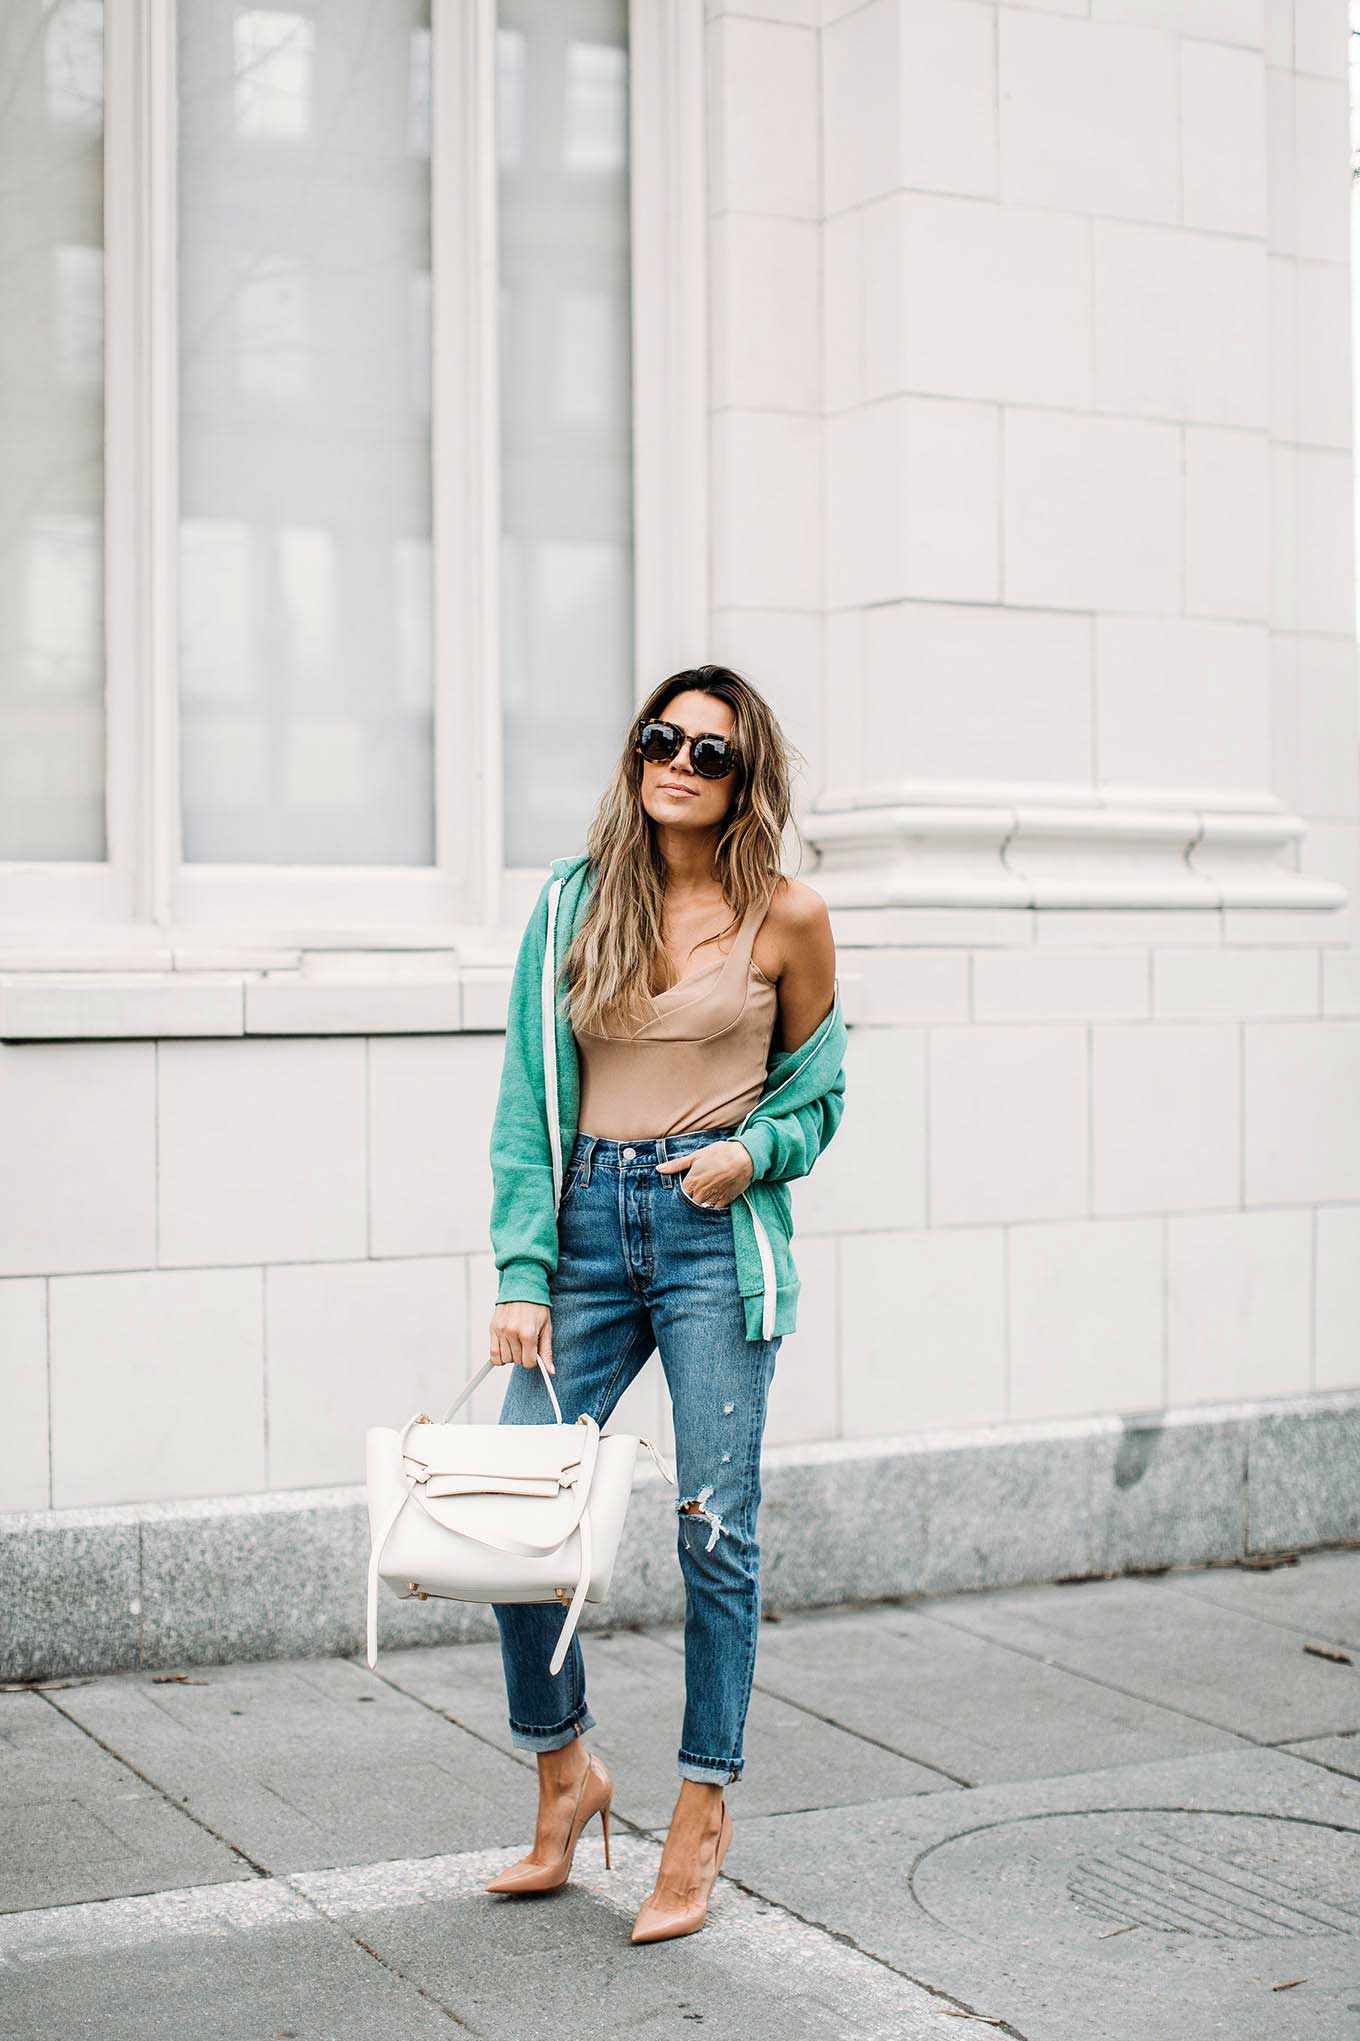 Pin on Fashion Street Casual Chic